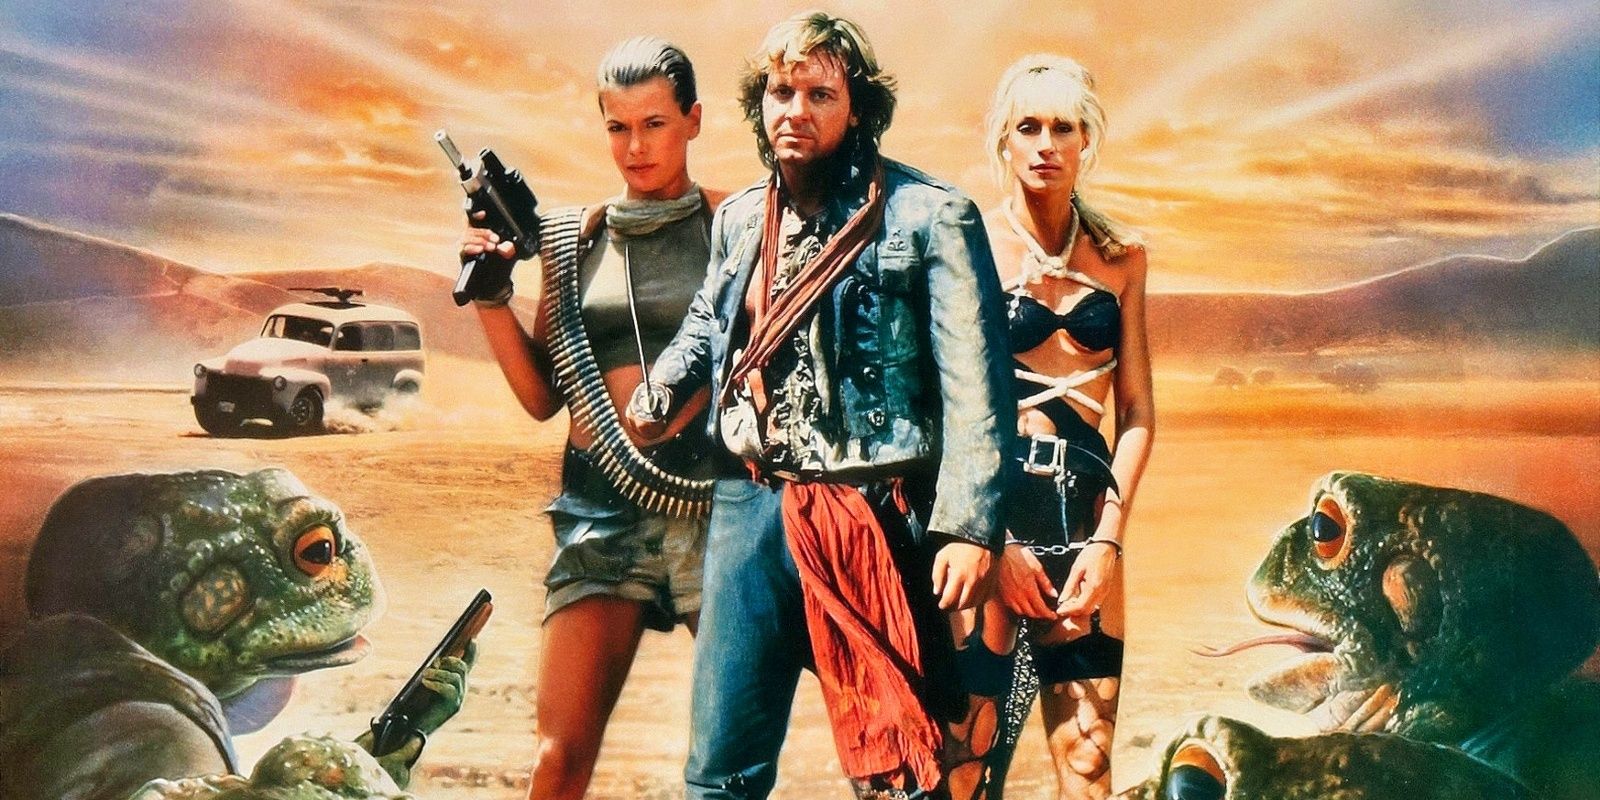 Hell Comes To Frogtown: Roddy Piper's Wild Mad Max Rip-off